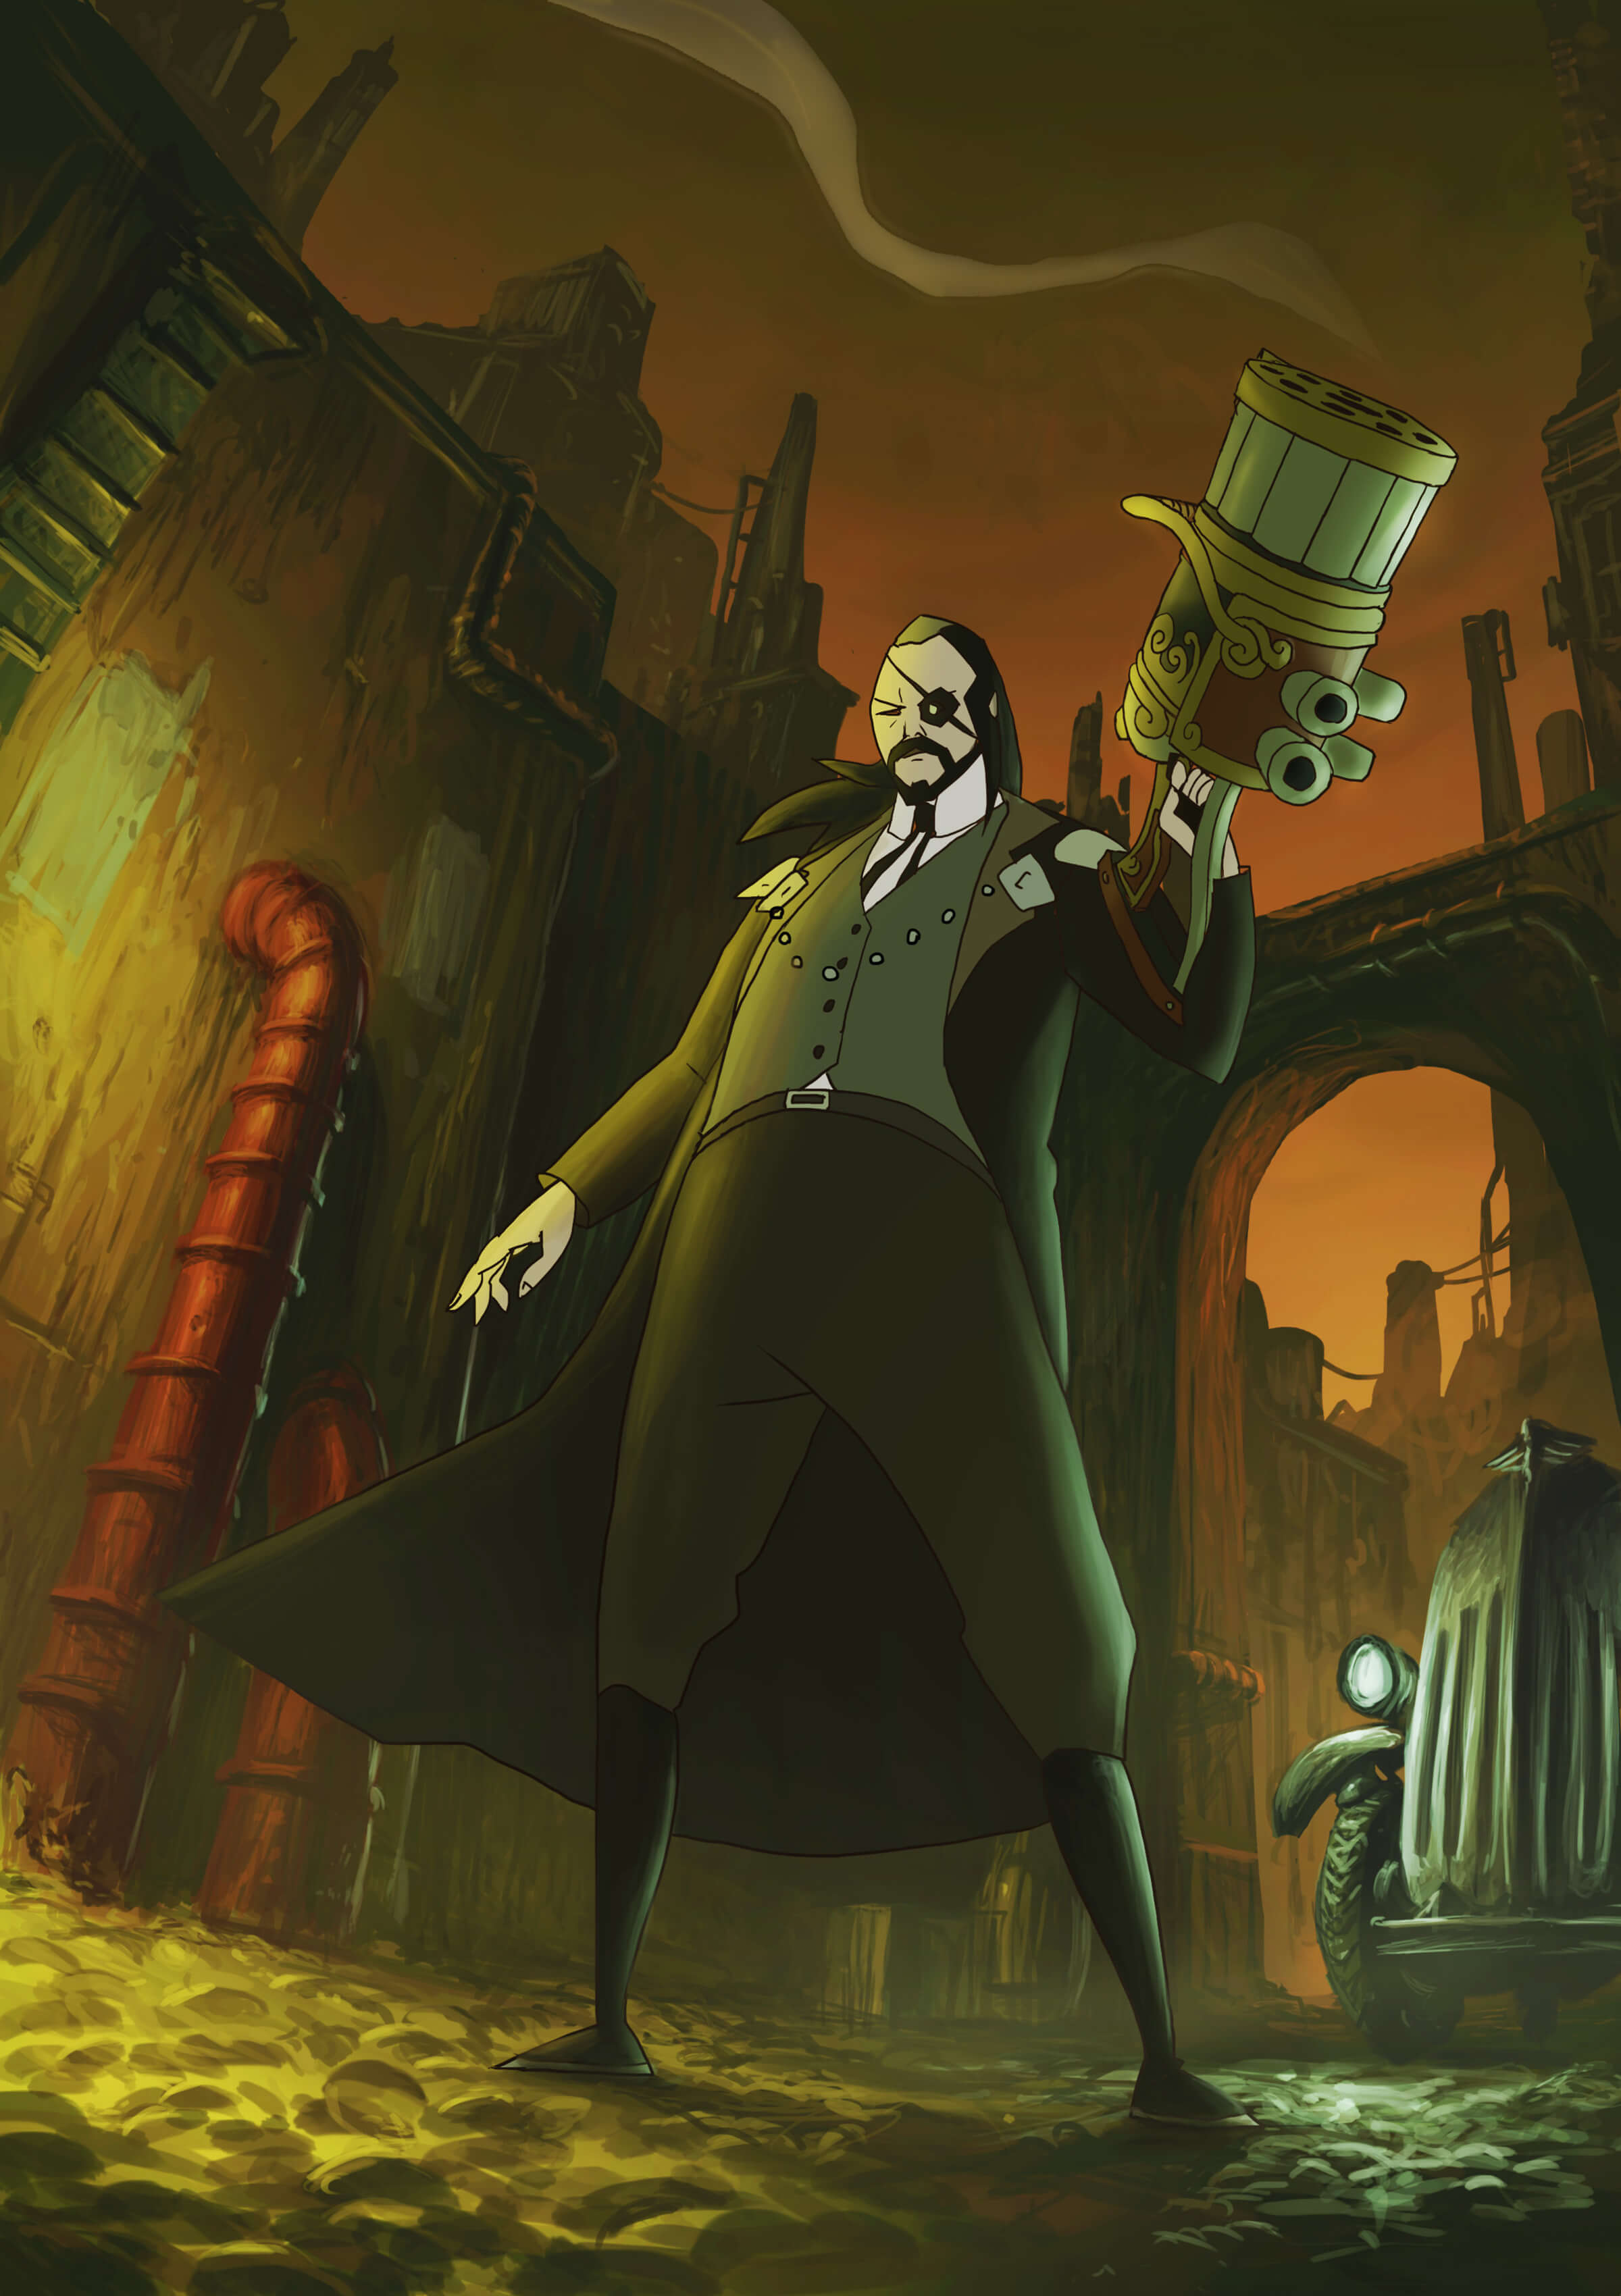 A man in an eye patch and steampunk garb stands in an industrial alleyway holding a large barrel-shaped weapon in one hand.